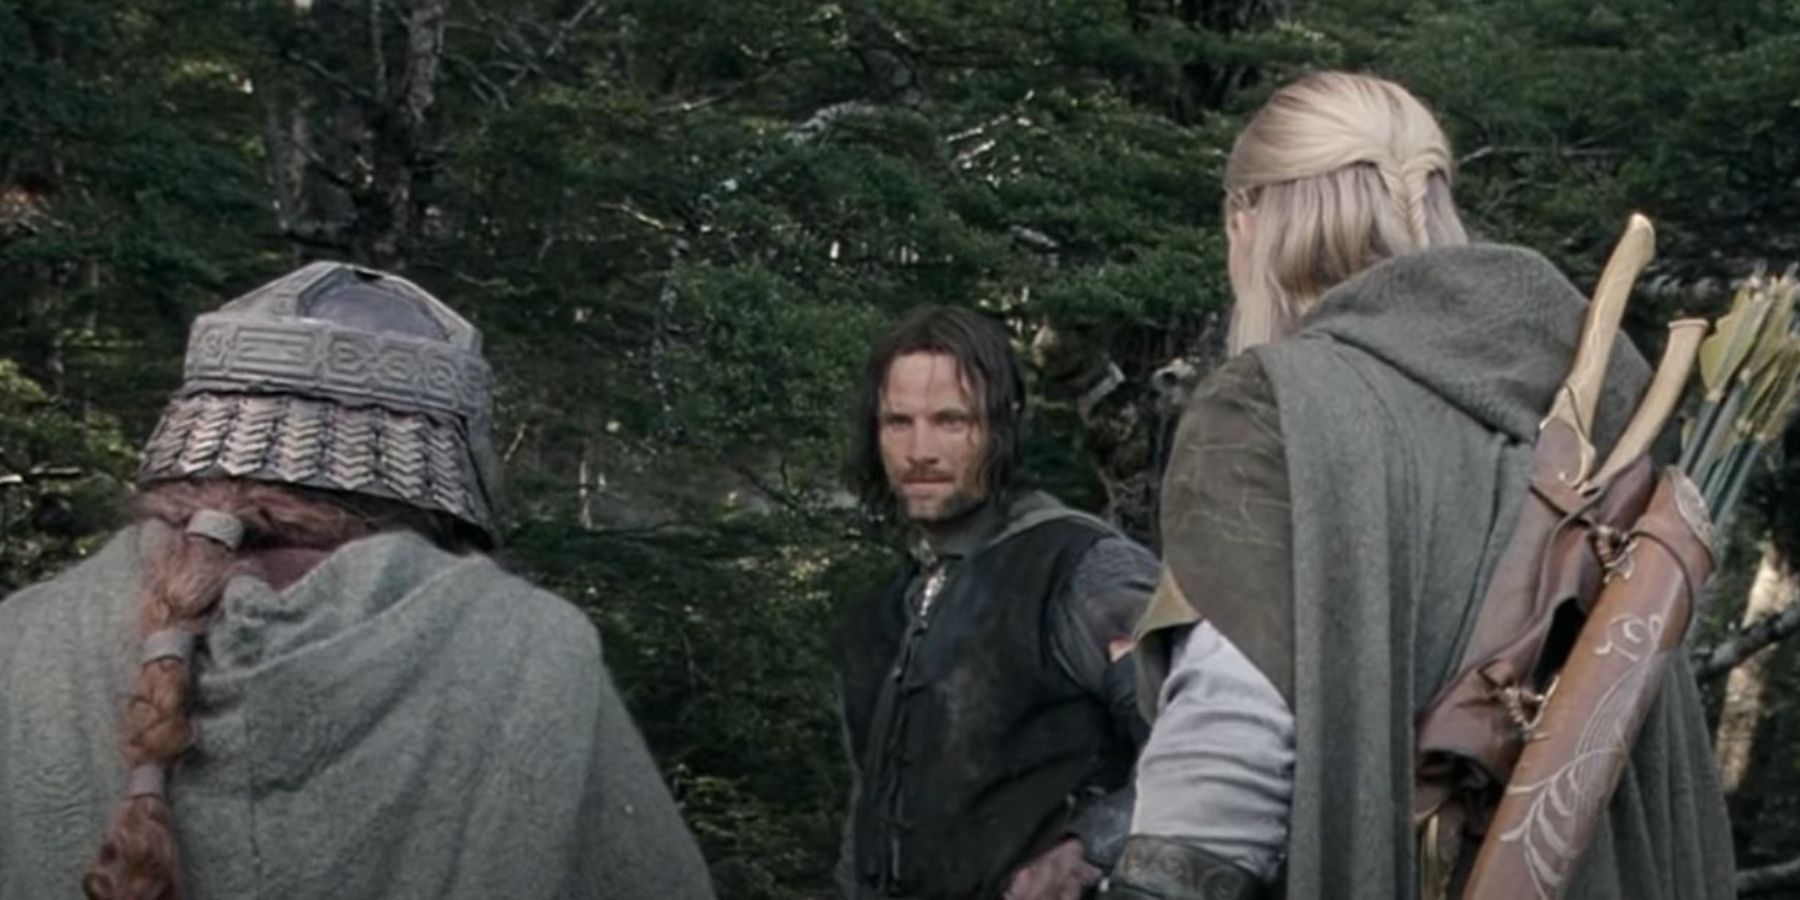 Aragorn, Legolas and Gimli decide to chase the hobbits